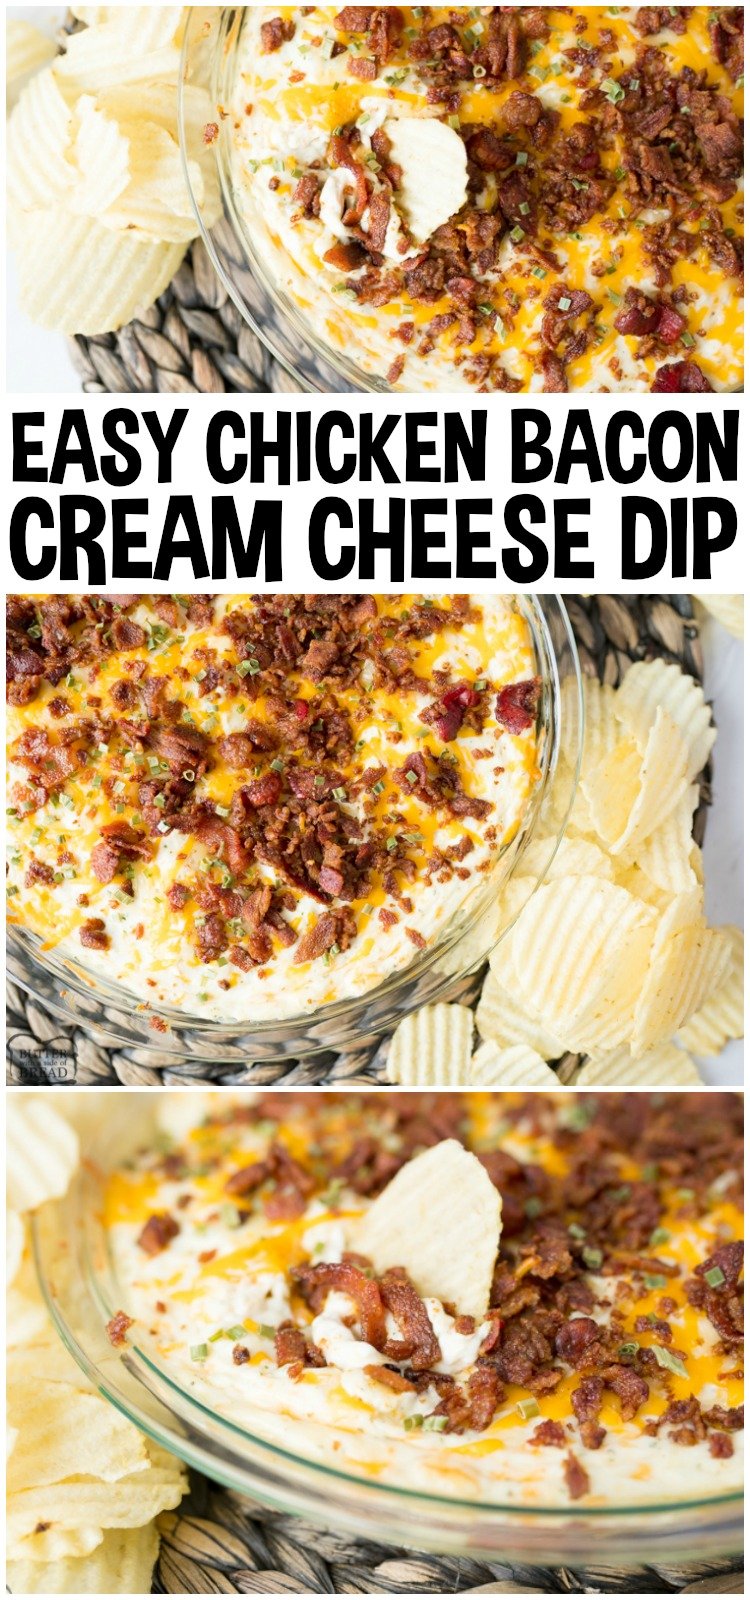 Chicken Cream Cheese Dip is a quick and easy hot appetizer. Perfect to throw together for a party or game day! Combining the classic flavors of chicken, bacon and ranch this cream cheese based dip is sure to be a crowd pleaser! #chipdip #appetizer #snacls #gameday #superbowl #bacon #chicken #creamcheese #recipe from BUTTER WITH A SIDE OF BREAD